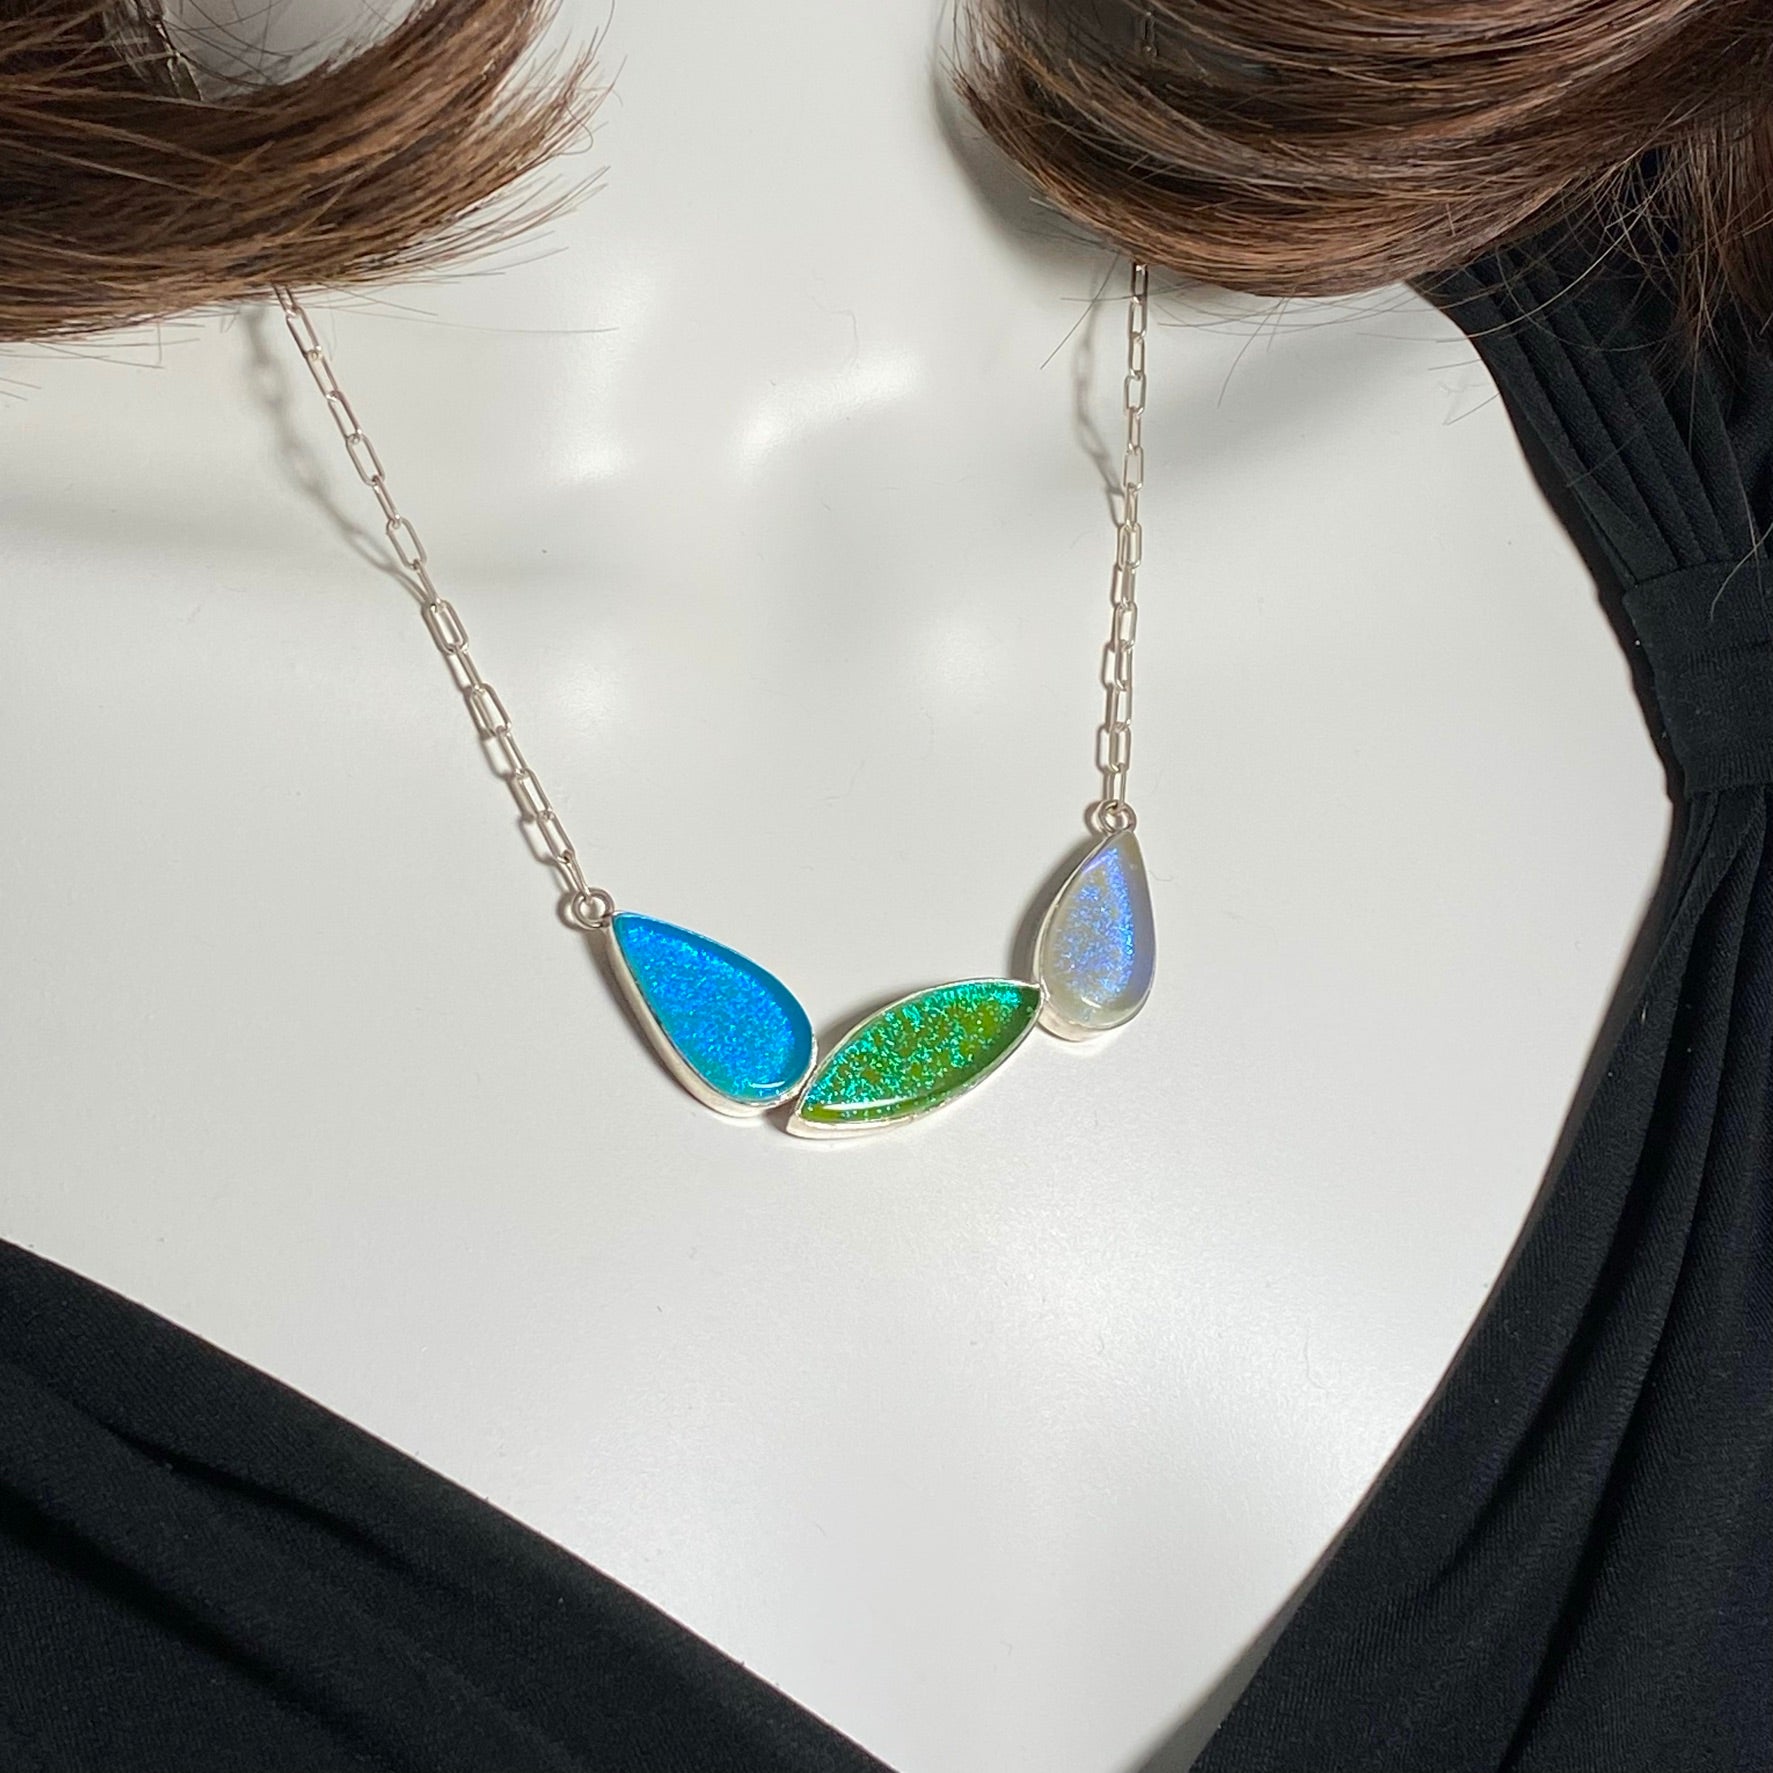 mid century modern, leaf necklace, three elements, blue, purple, green, fused glass, glass jewelry, glass and silver jewelry, handmade, handcrafted, American Craft, hand fabricated jewelry, hand fabricated jewellery, Athen, Georgia, colorful jewelry, sparkle, bullseye glass, dichroic glass, art jewelry